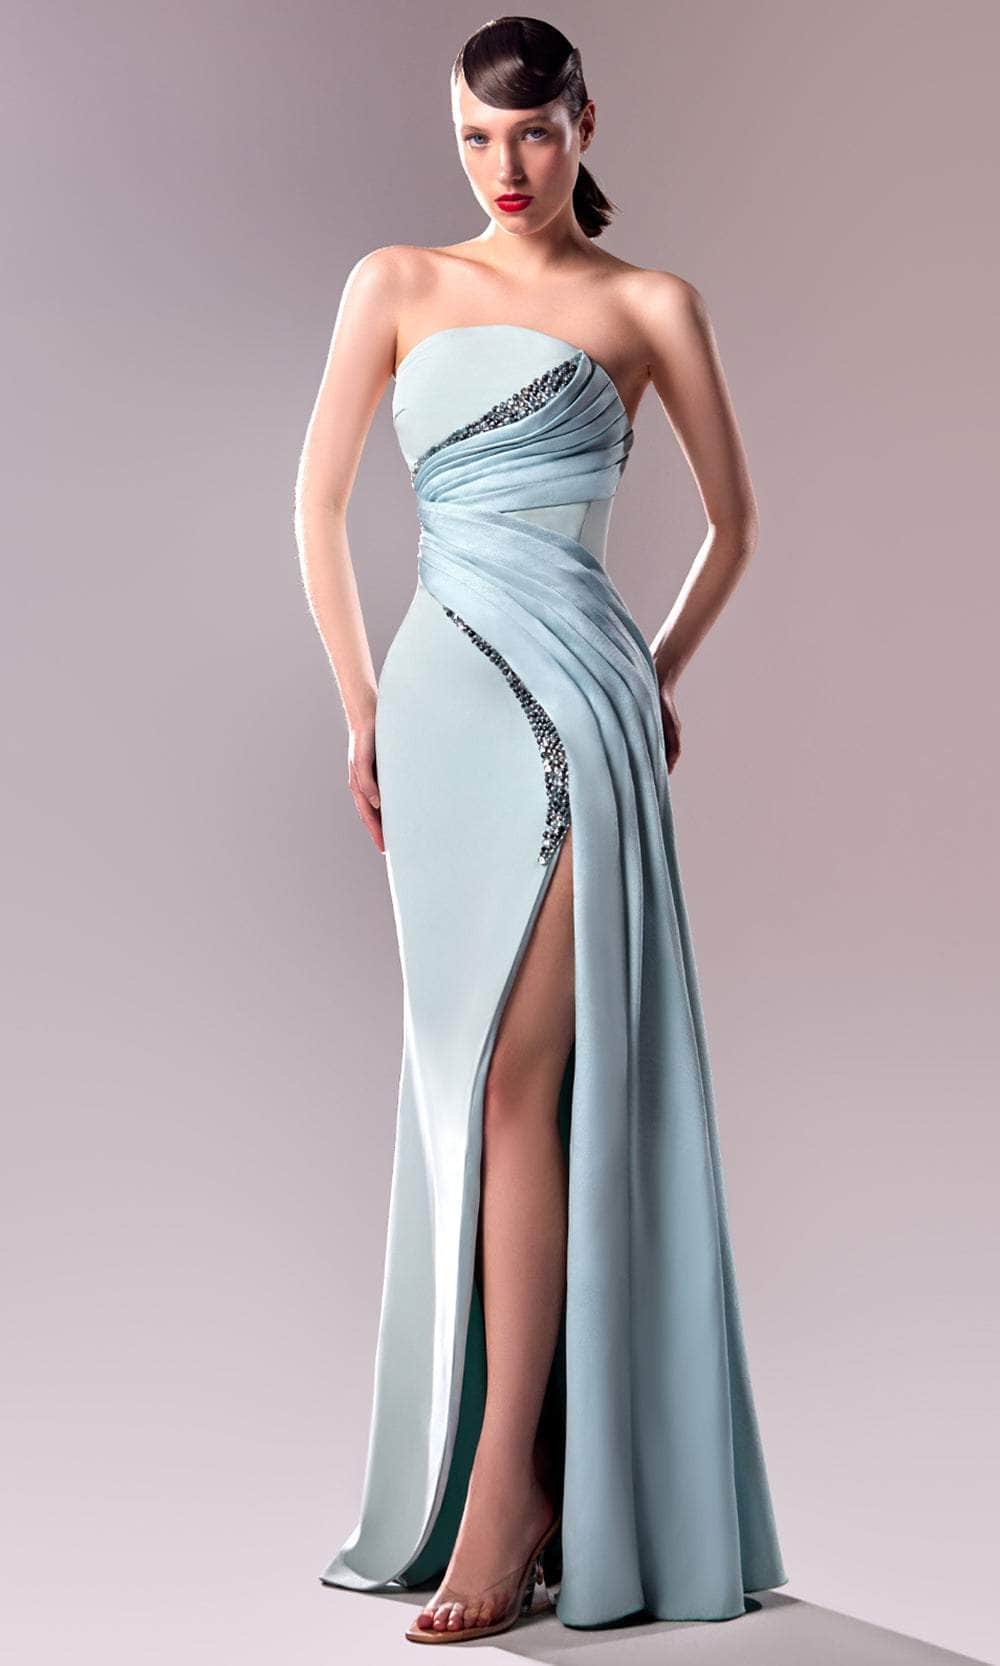 MNM Couture G1608 - Strapless Crystal Bead Embellished Gown
